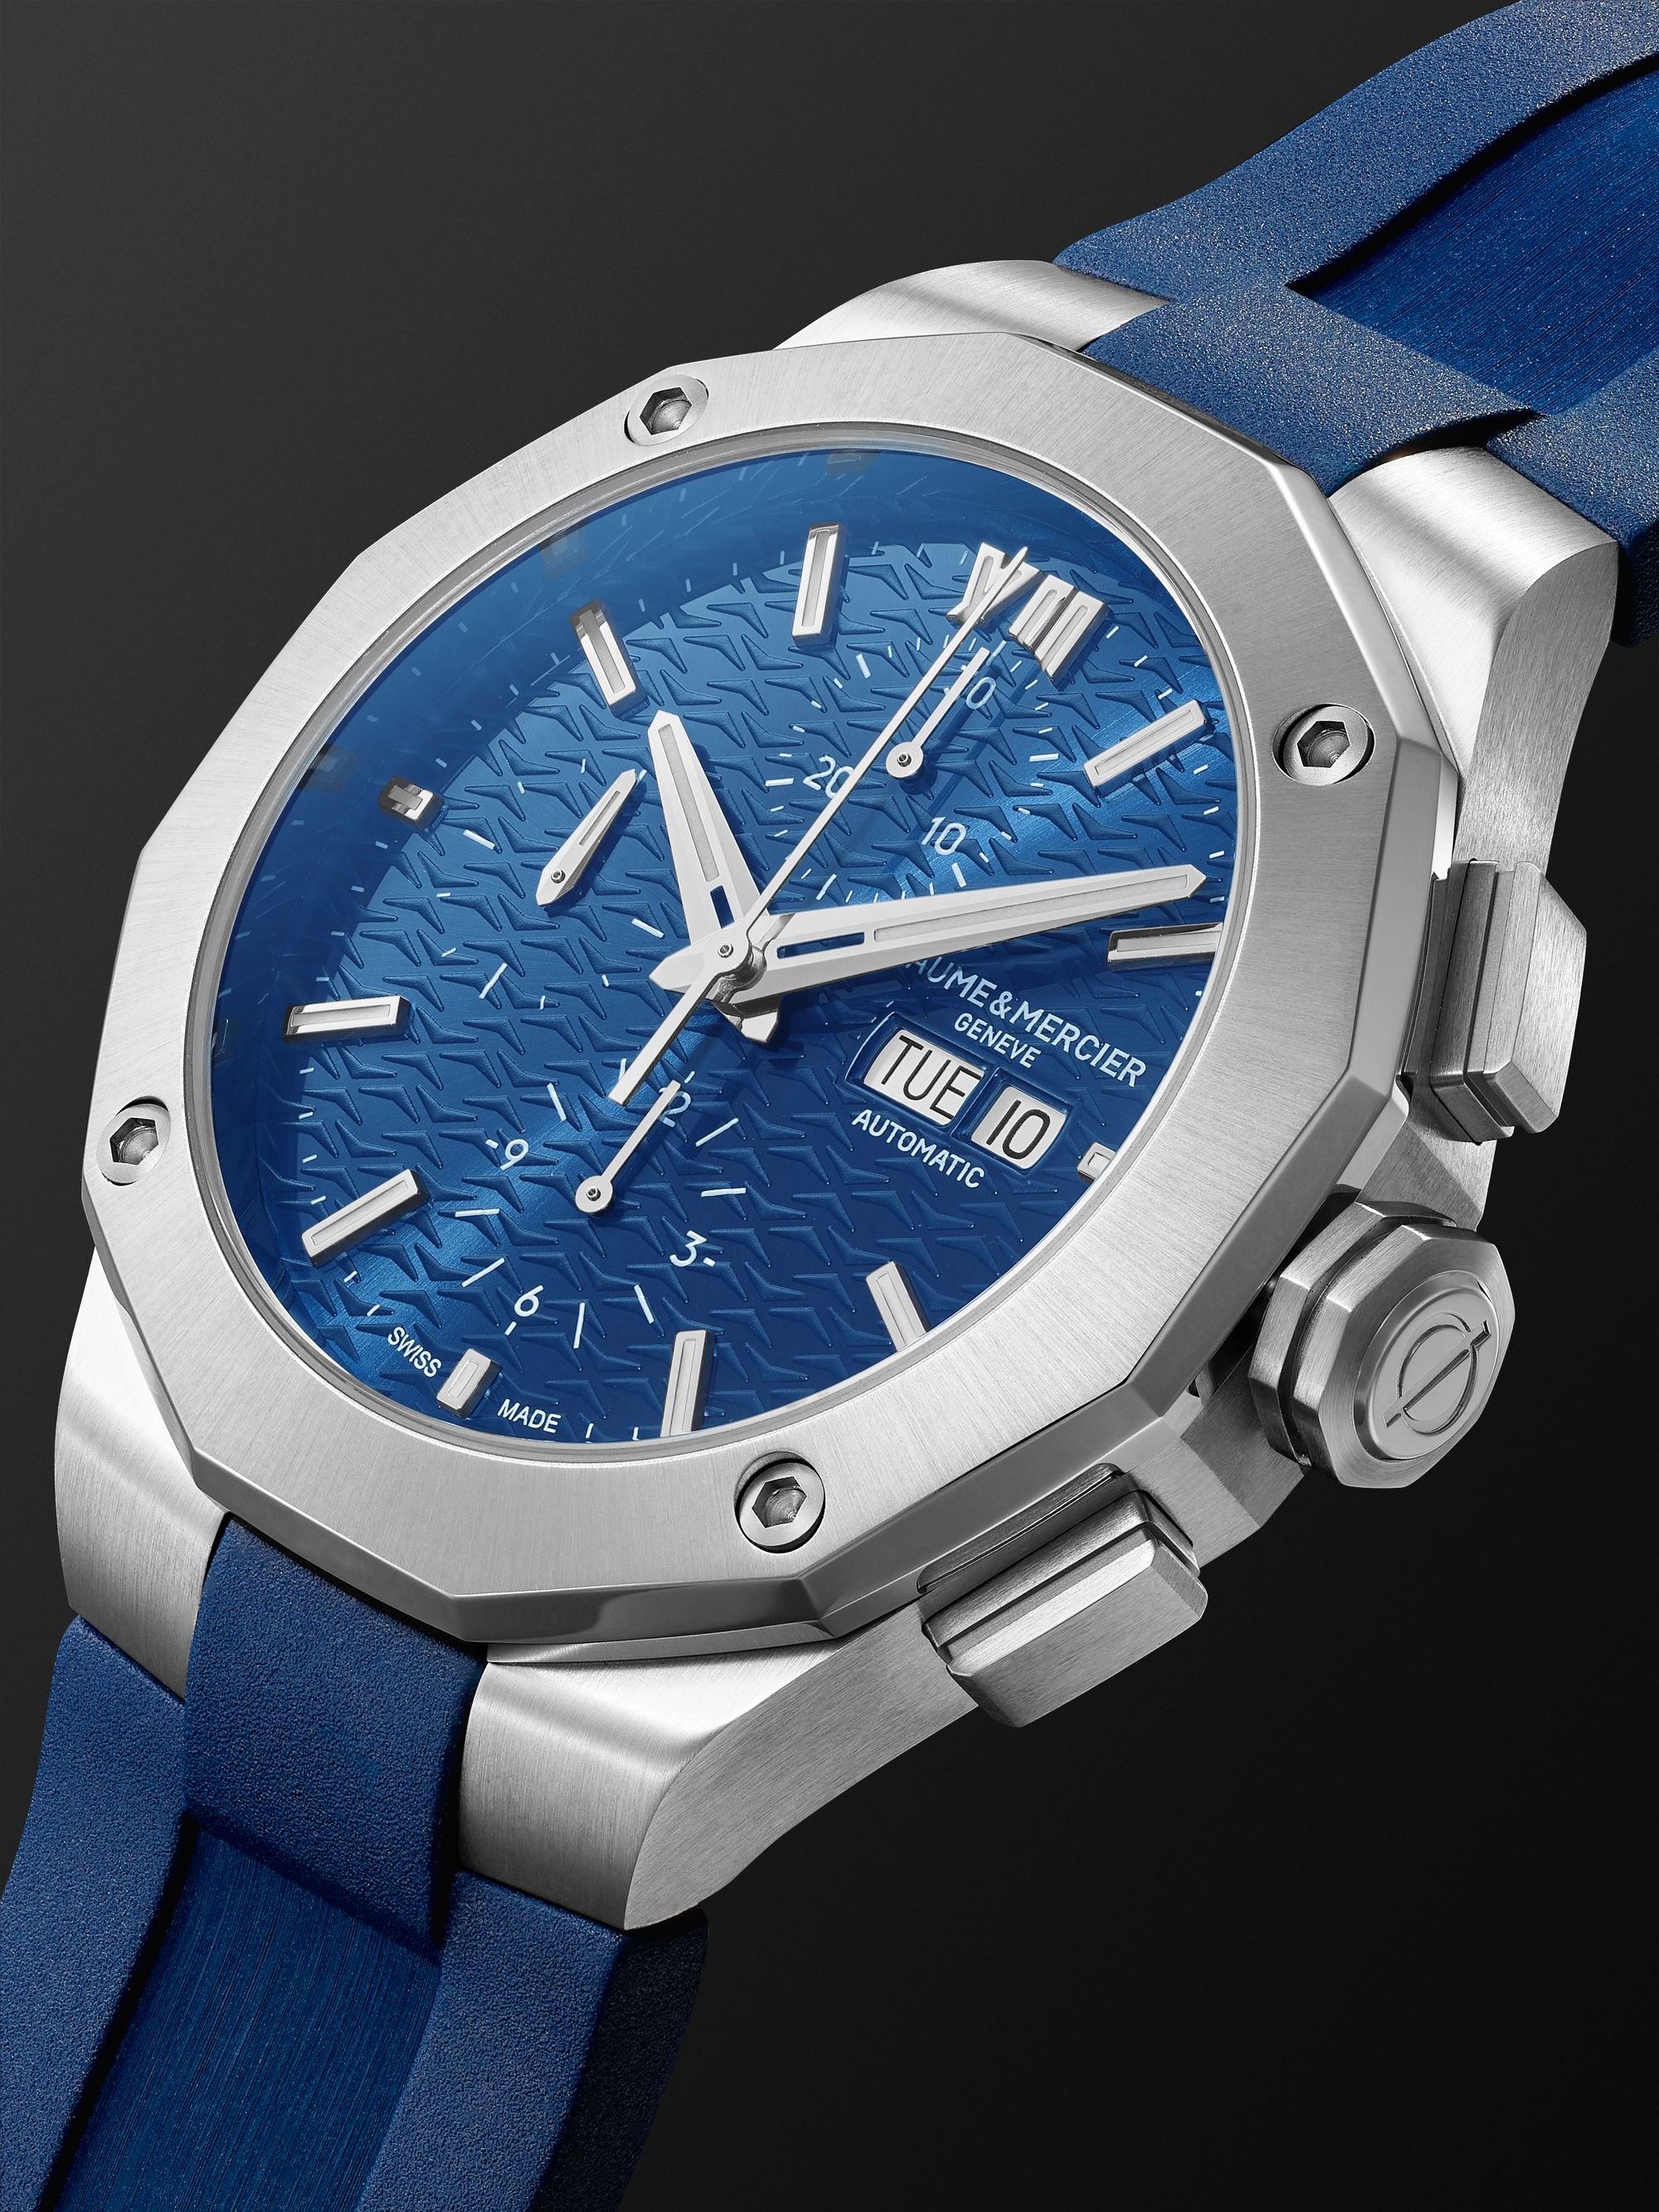 BAUME & MERCIER Riviera Baumatic Automatic Chronograph 43mm Stainless Steel and Rubber Watch, Ref. No. M0A10623